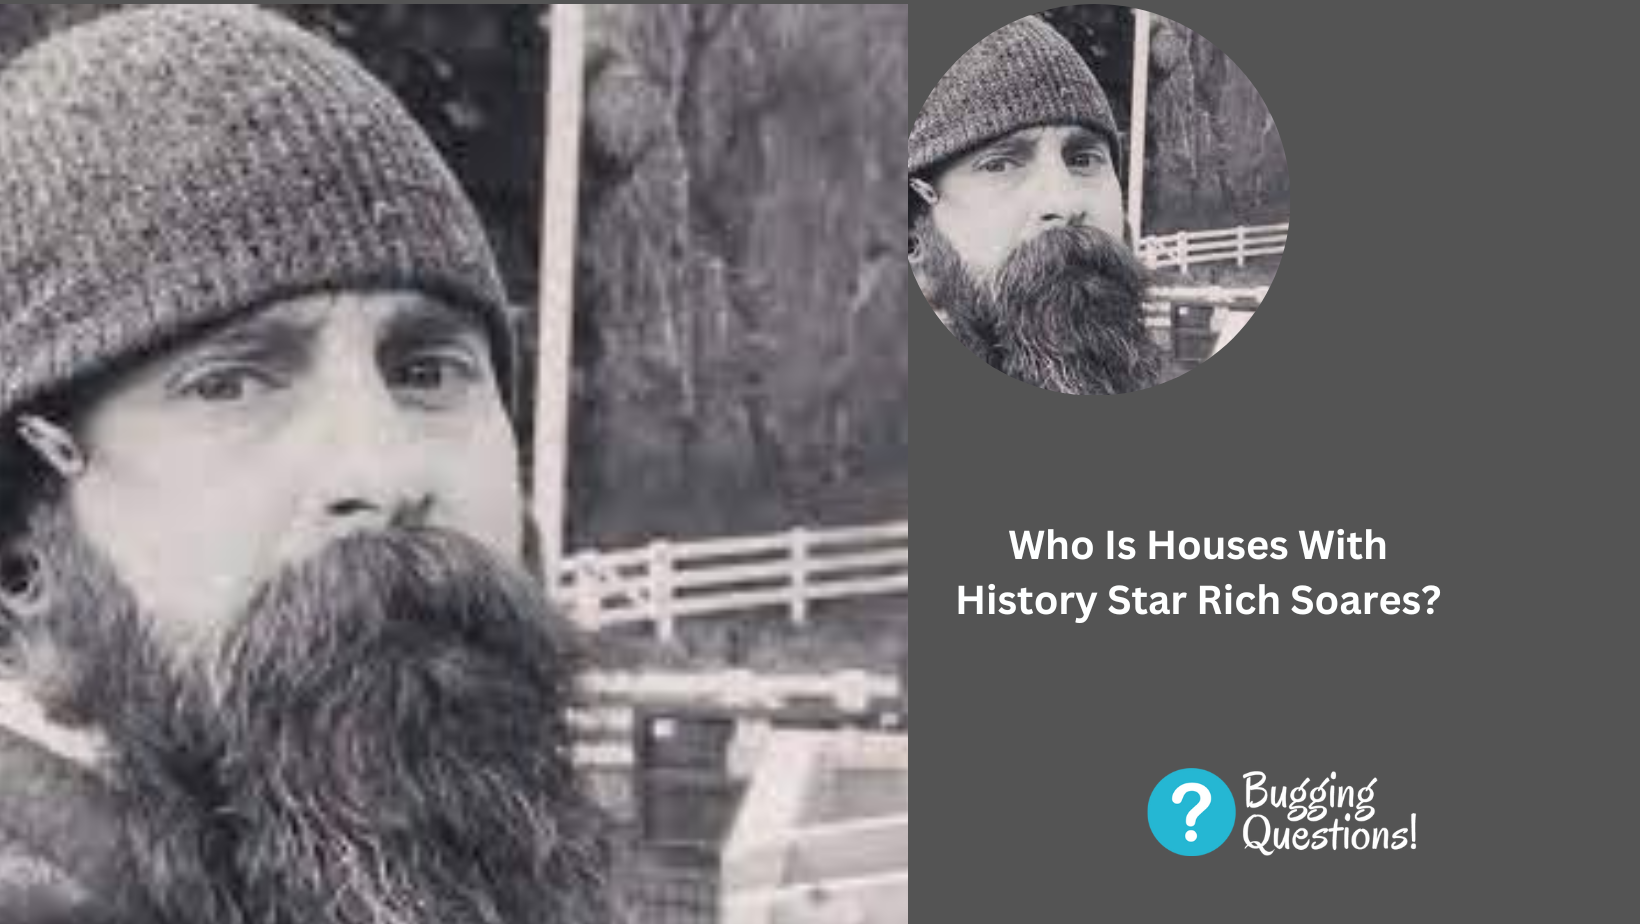 Who Is Houses With History Star Rich Soares?